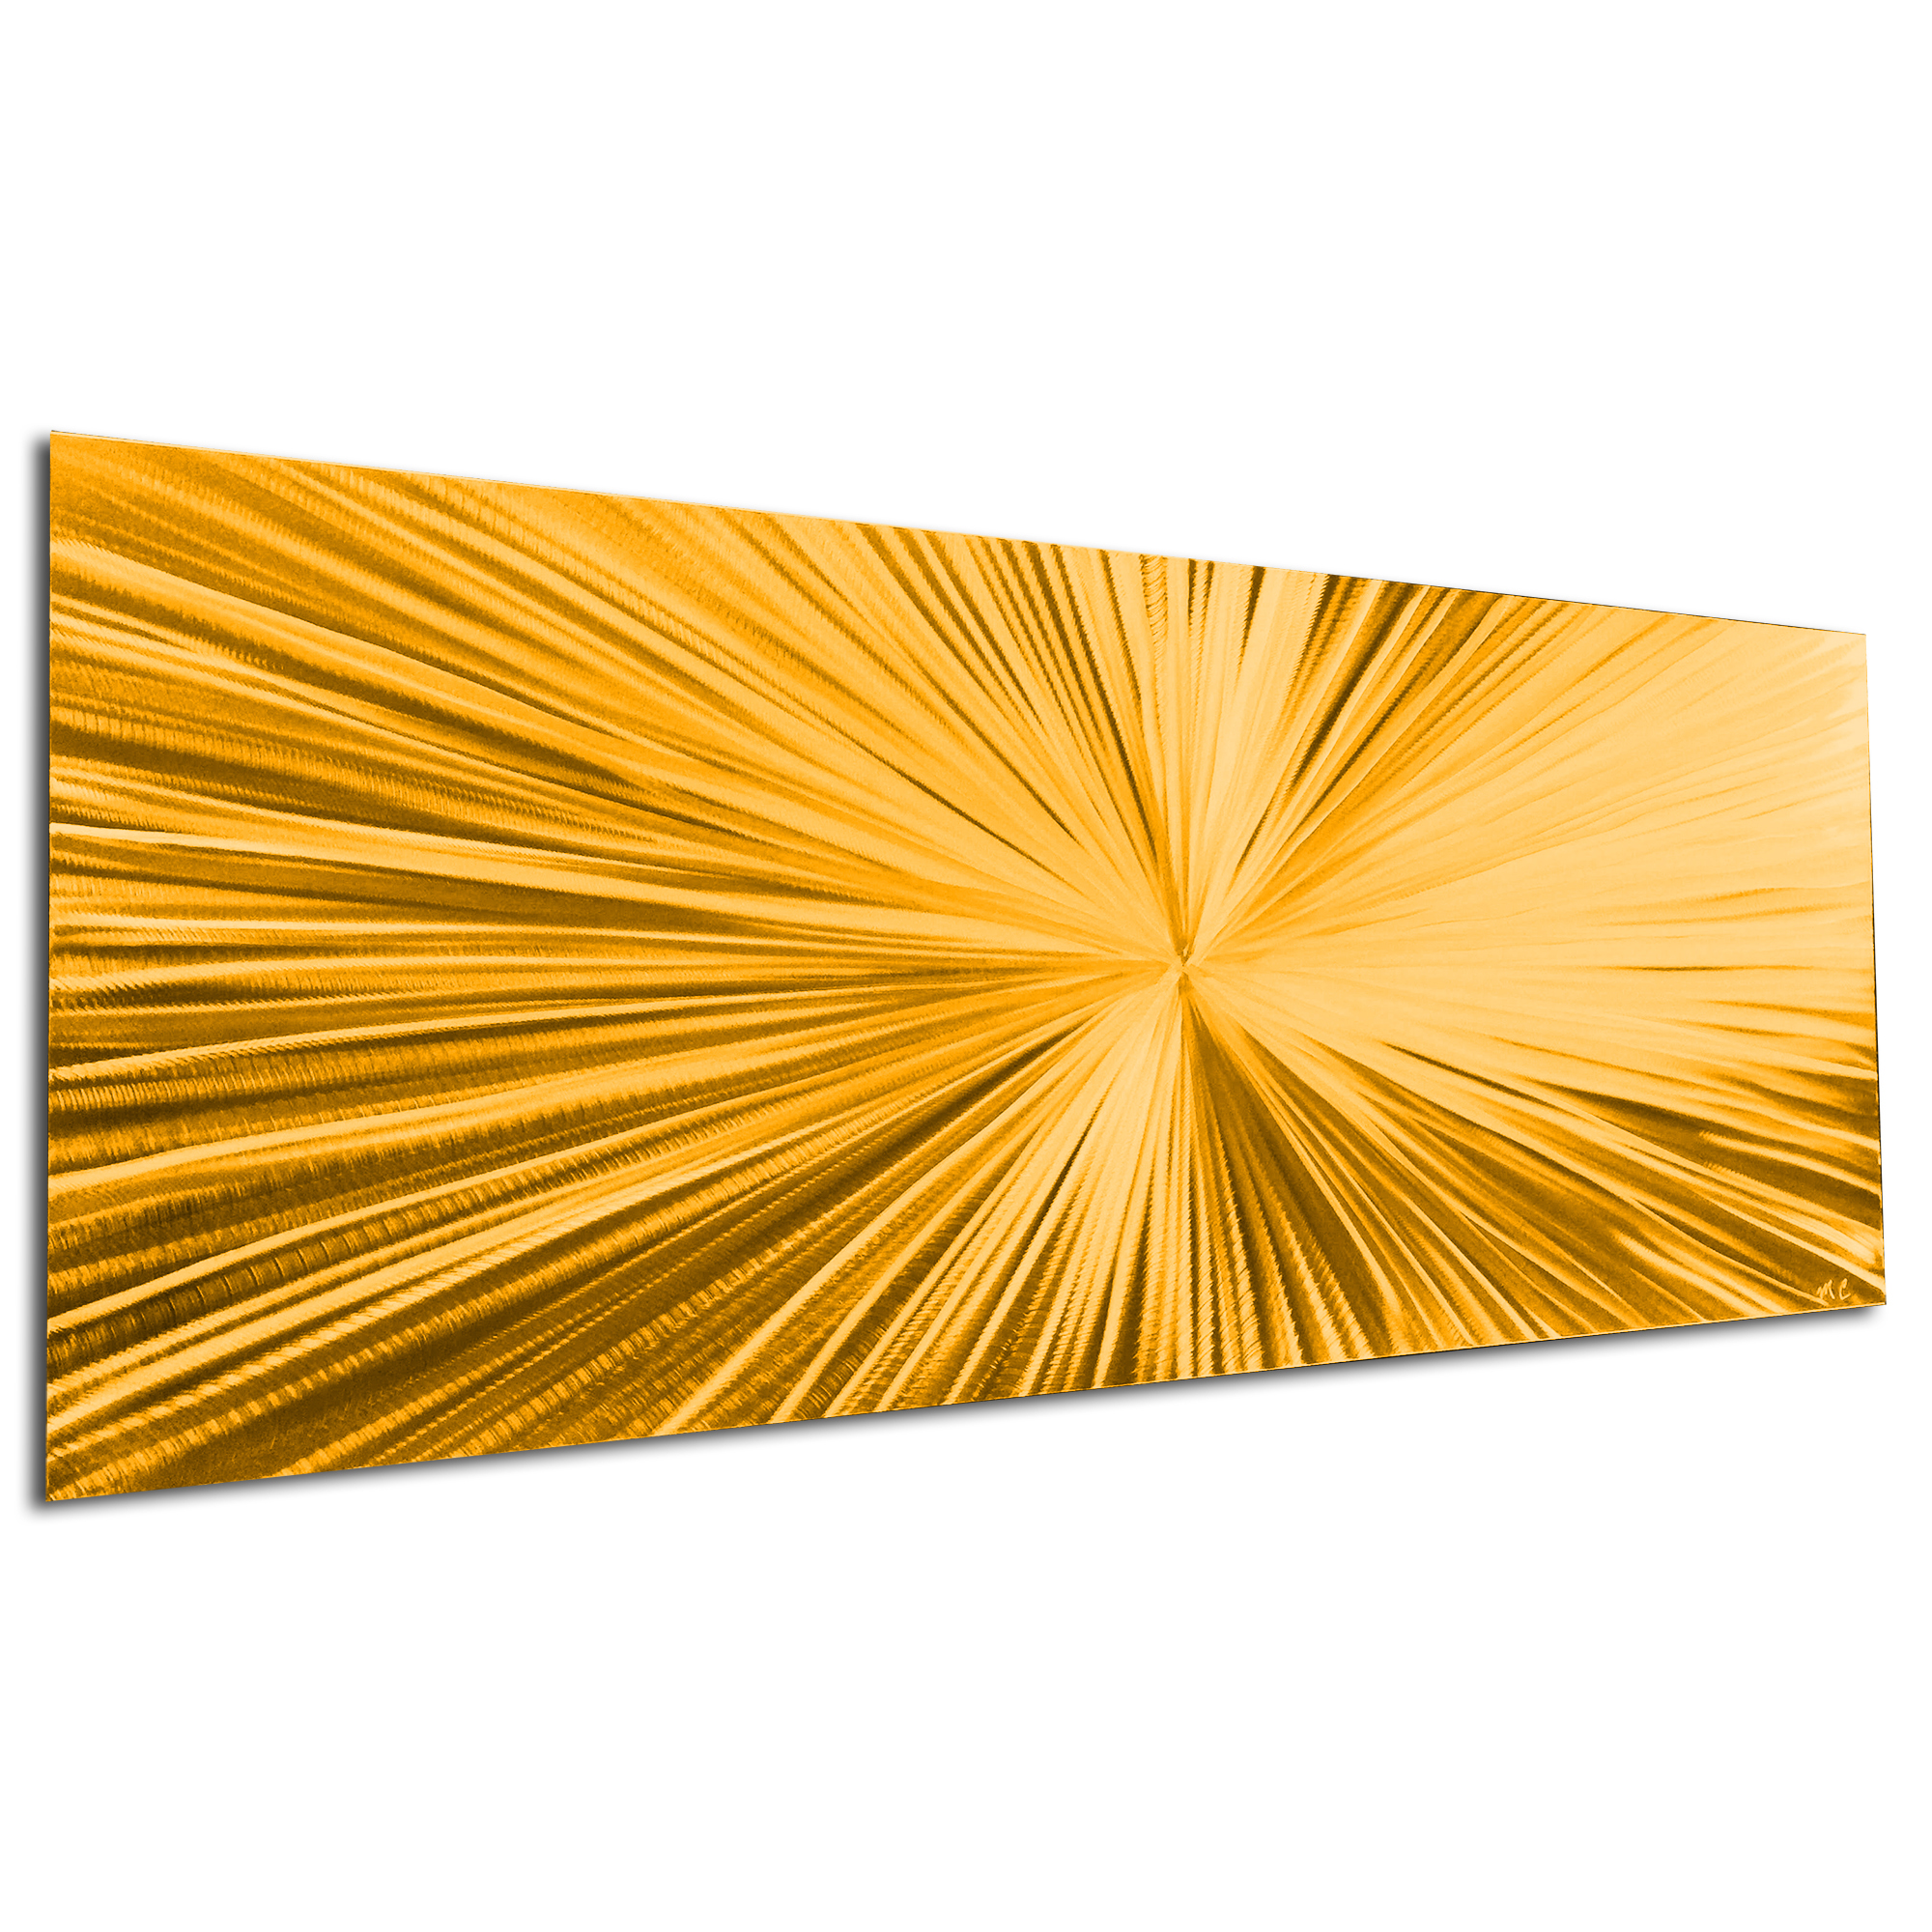 Starburst Gold by Helena Martin - Original Abstract Art on Ground and Painted Metal - Image 3